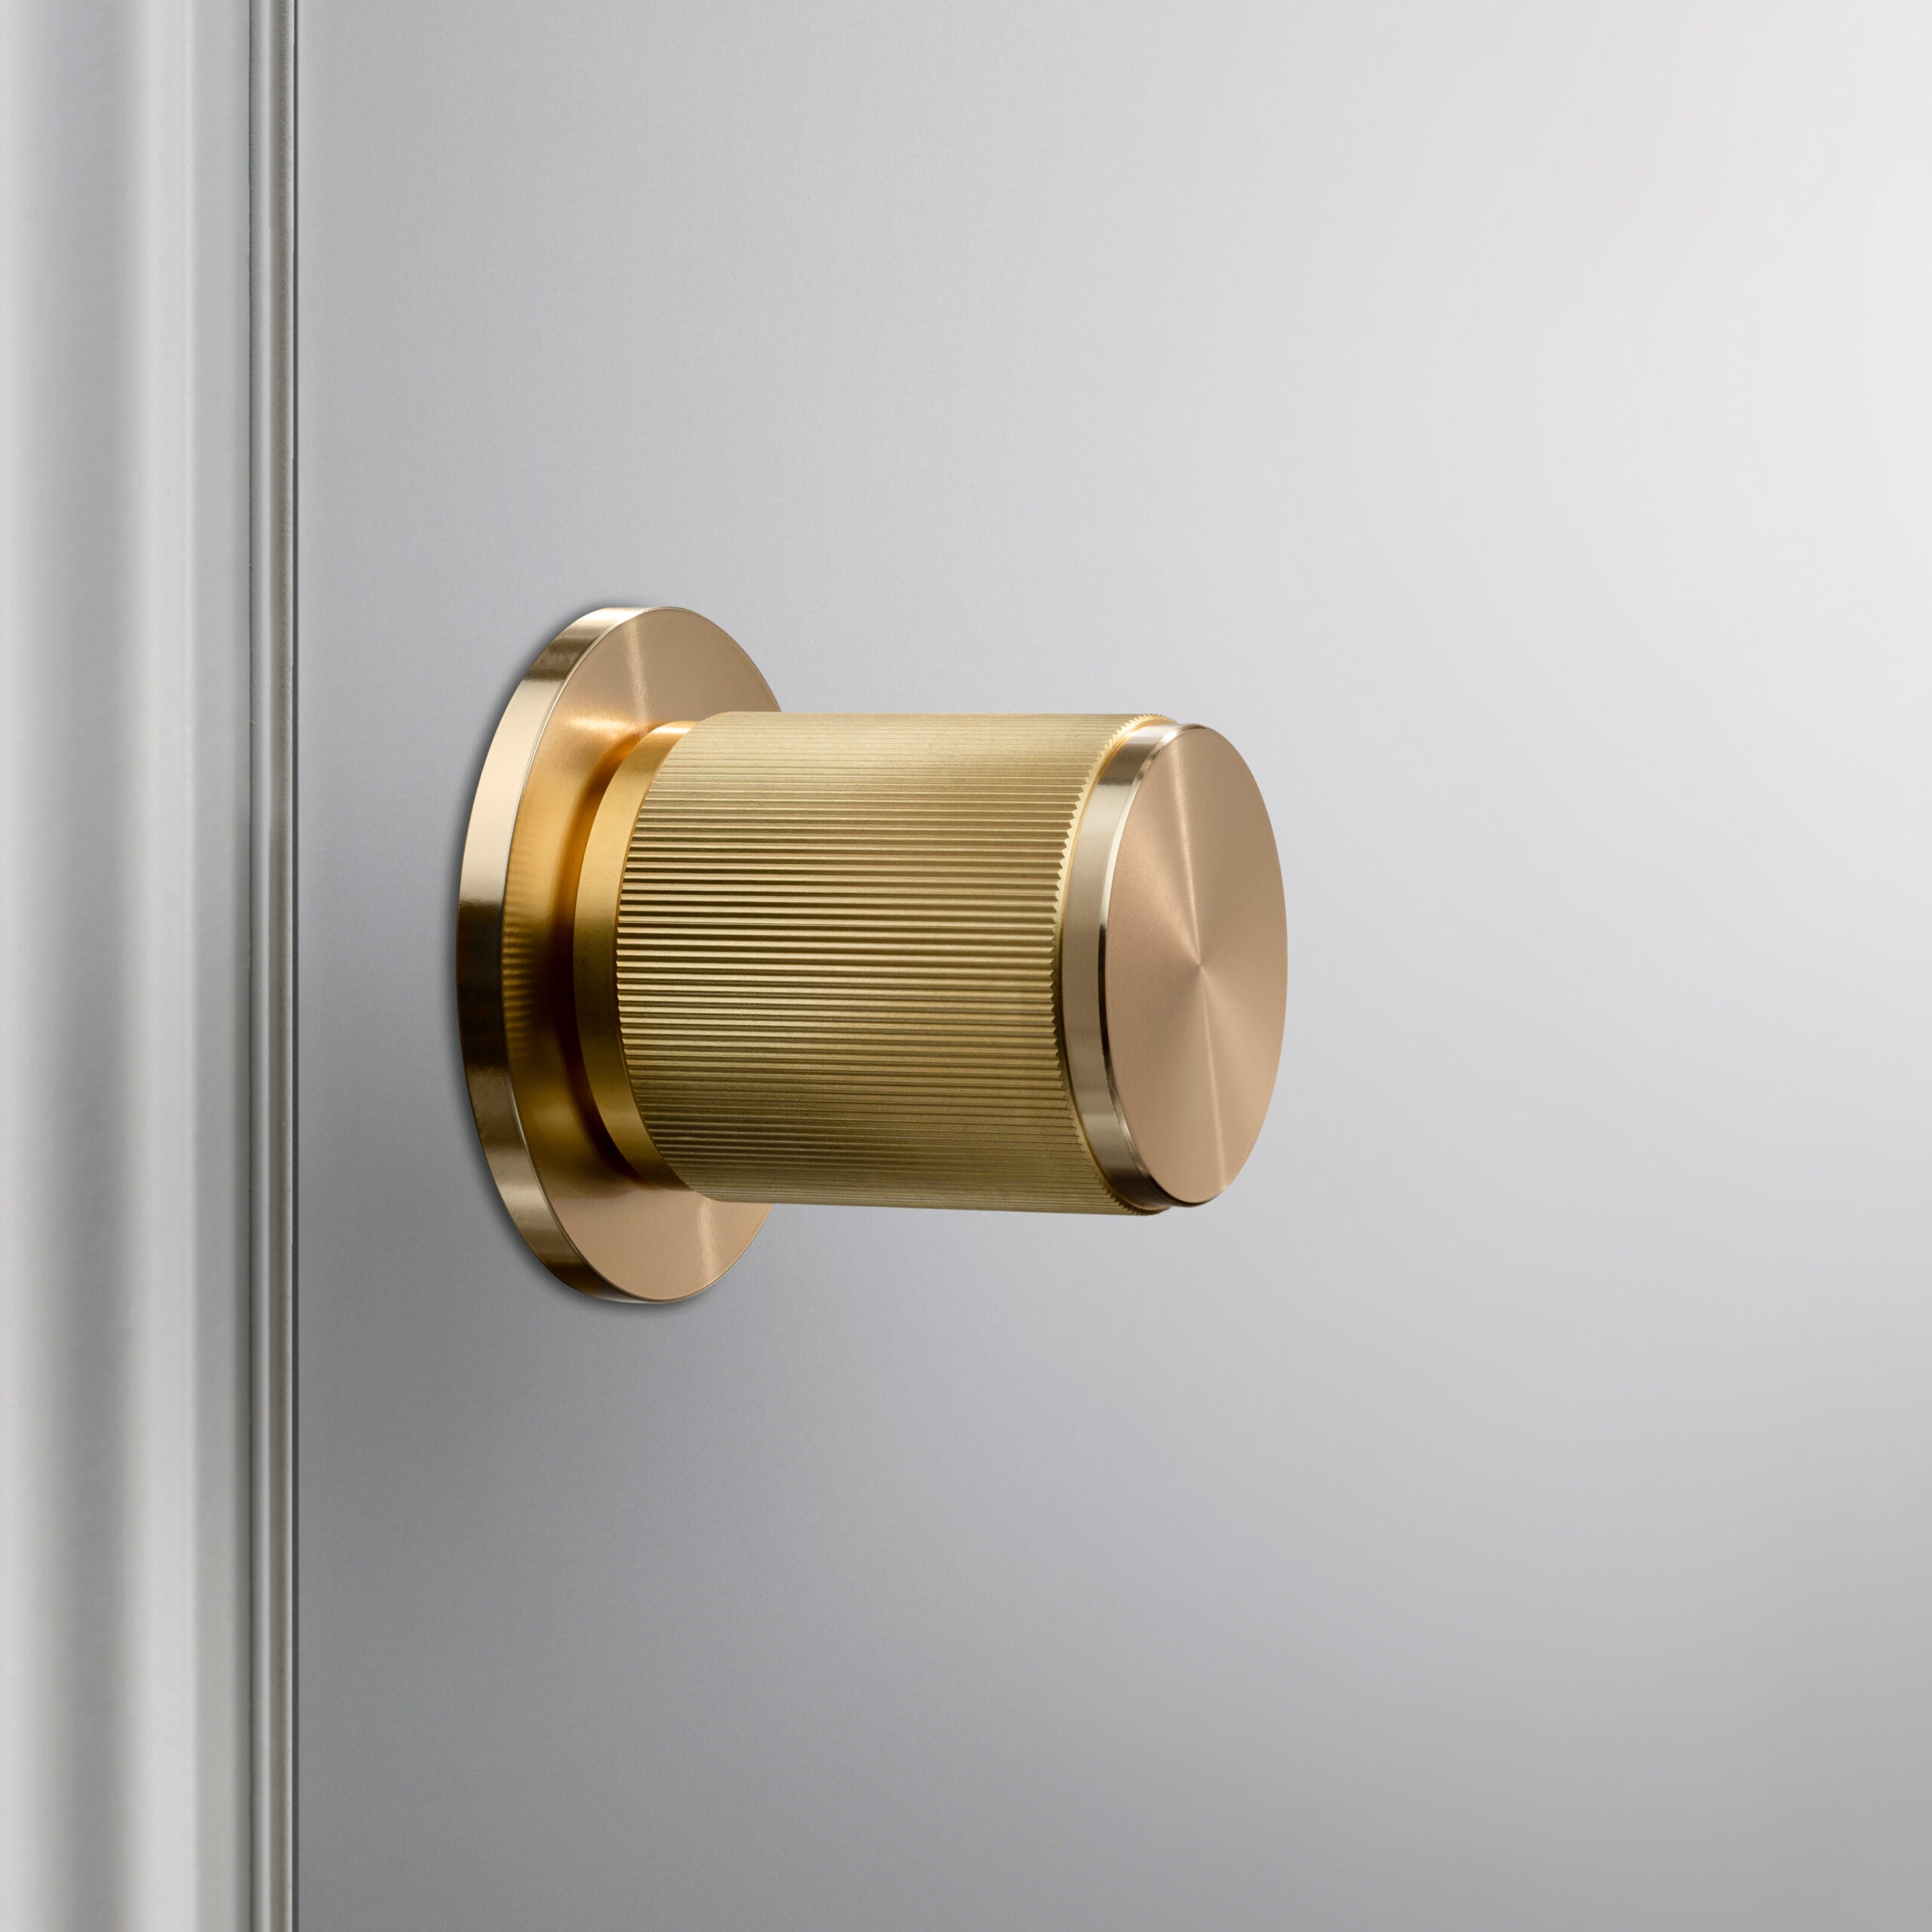 Buster + Punch Door Knob Double Sided, Linear Design, FIXED TYPE Hardware Buster + Punch Brass  